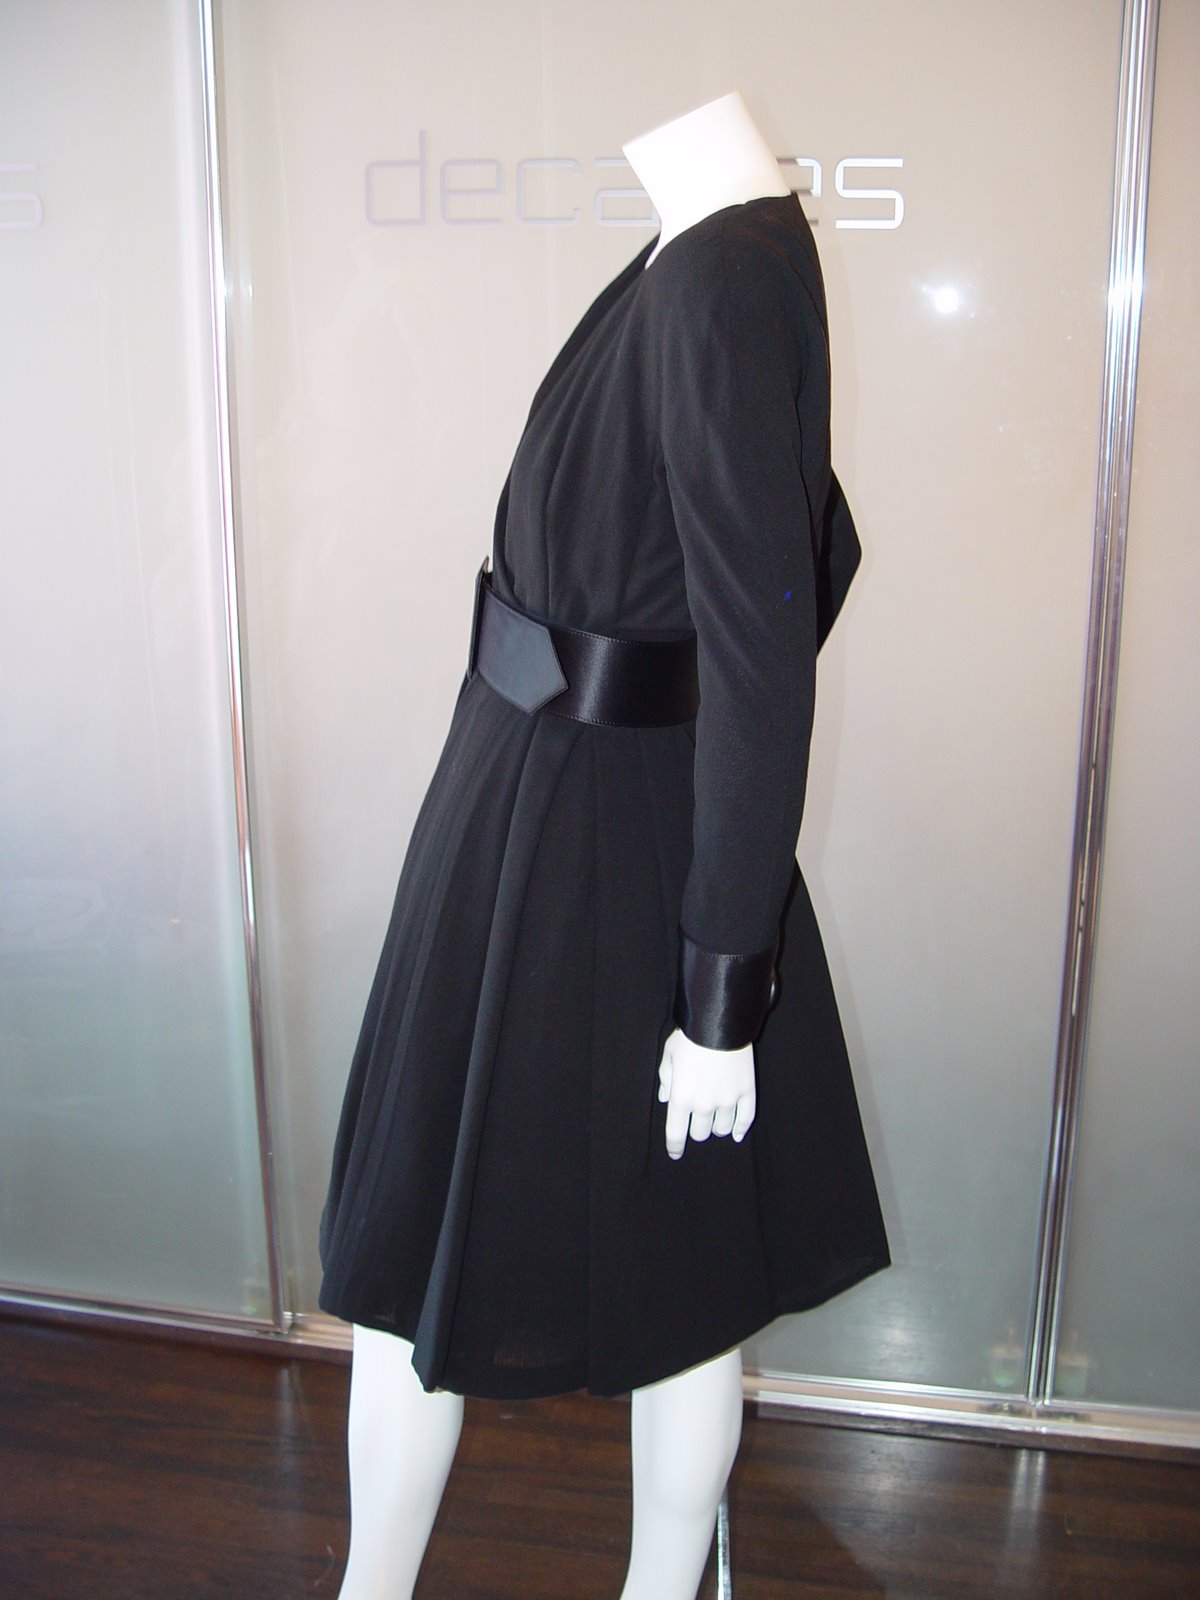 [DIOR+HAUTE+COUTURE+BY+GIANFRANCO+FERRE+BLACK+CREPE+WOOL+DRESS+-+2.JPG]